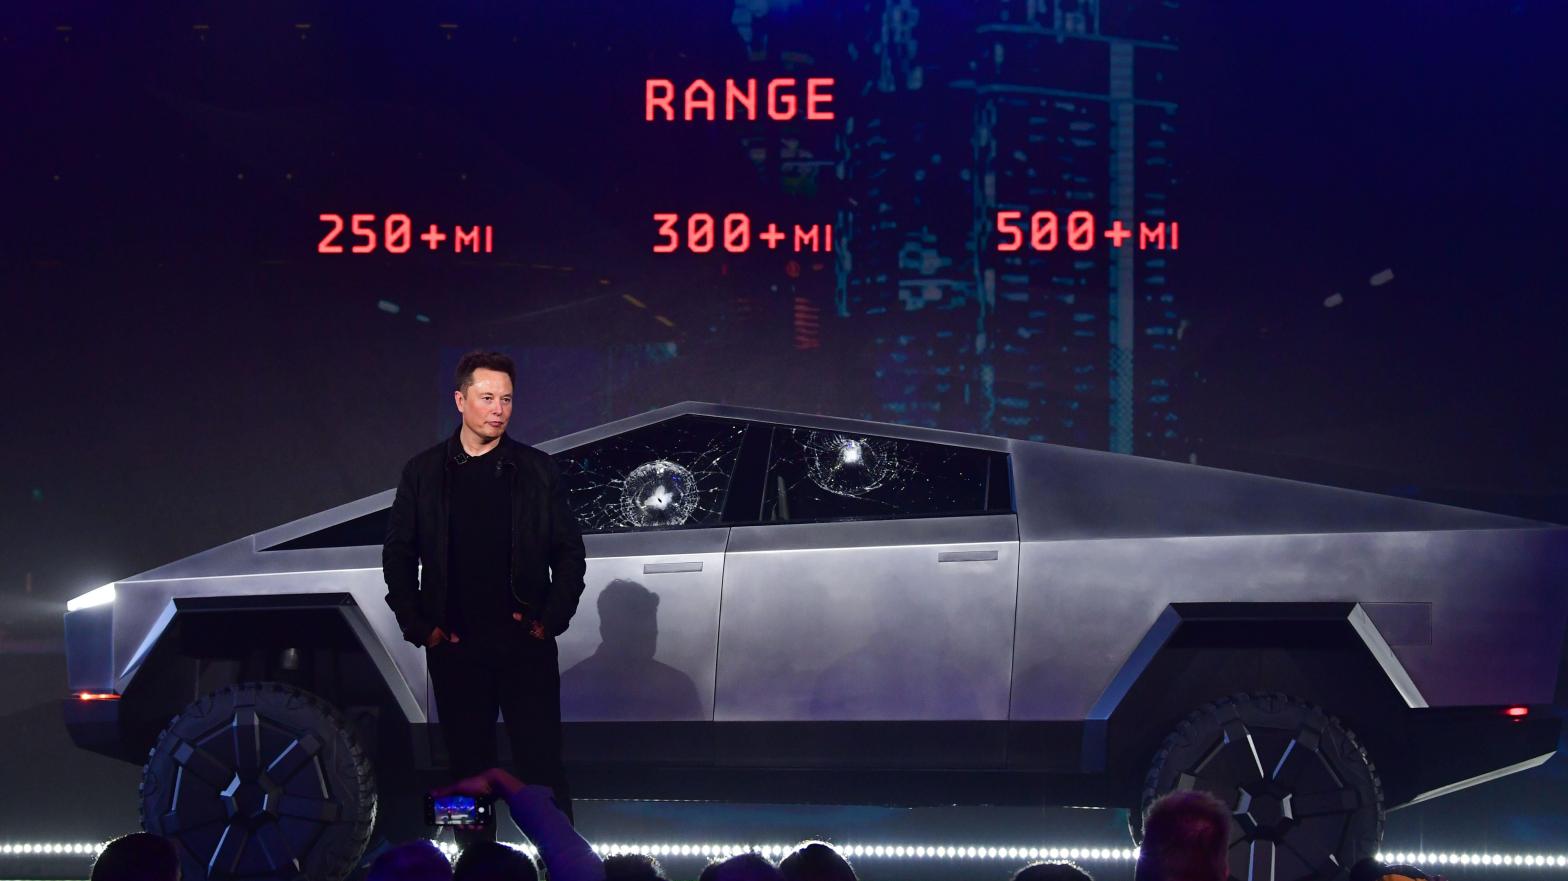 The Cybertruck has been promised for years. Back in 2019, the company said the car could survive hard ballistic impacts. That claim was notably short lived. (Photo: FREDERIC J. BROWN/AFP, Getty Images)